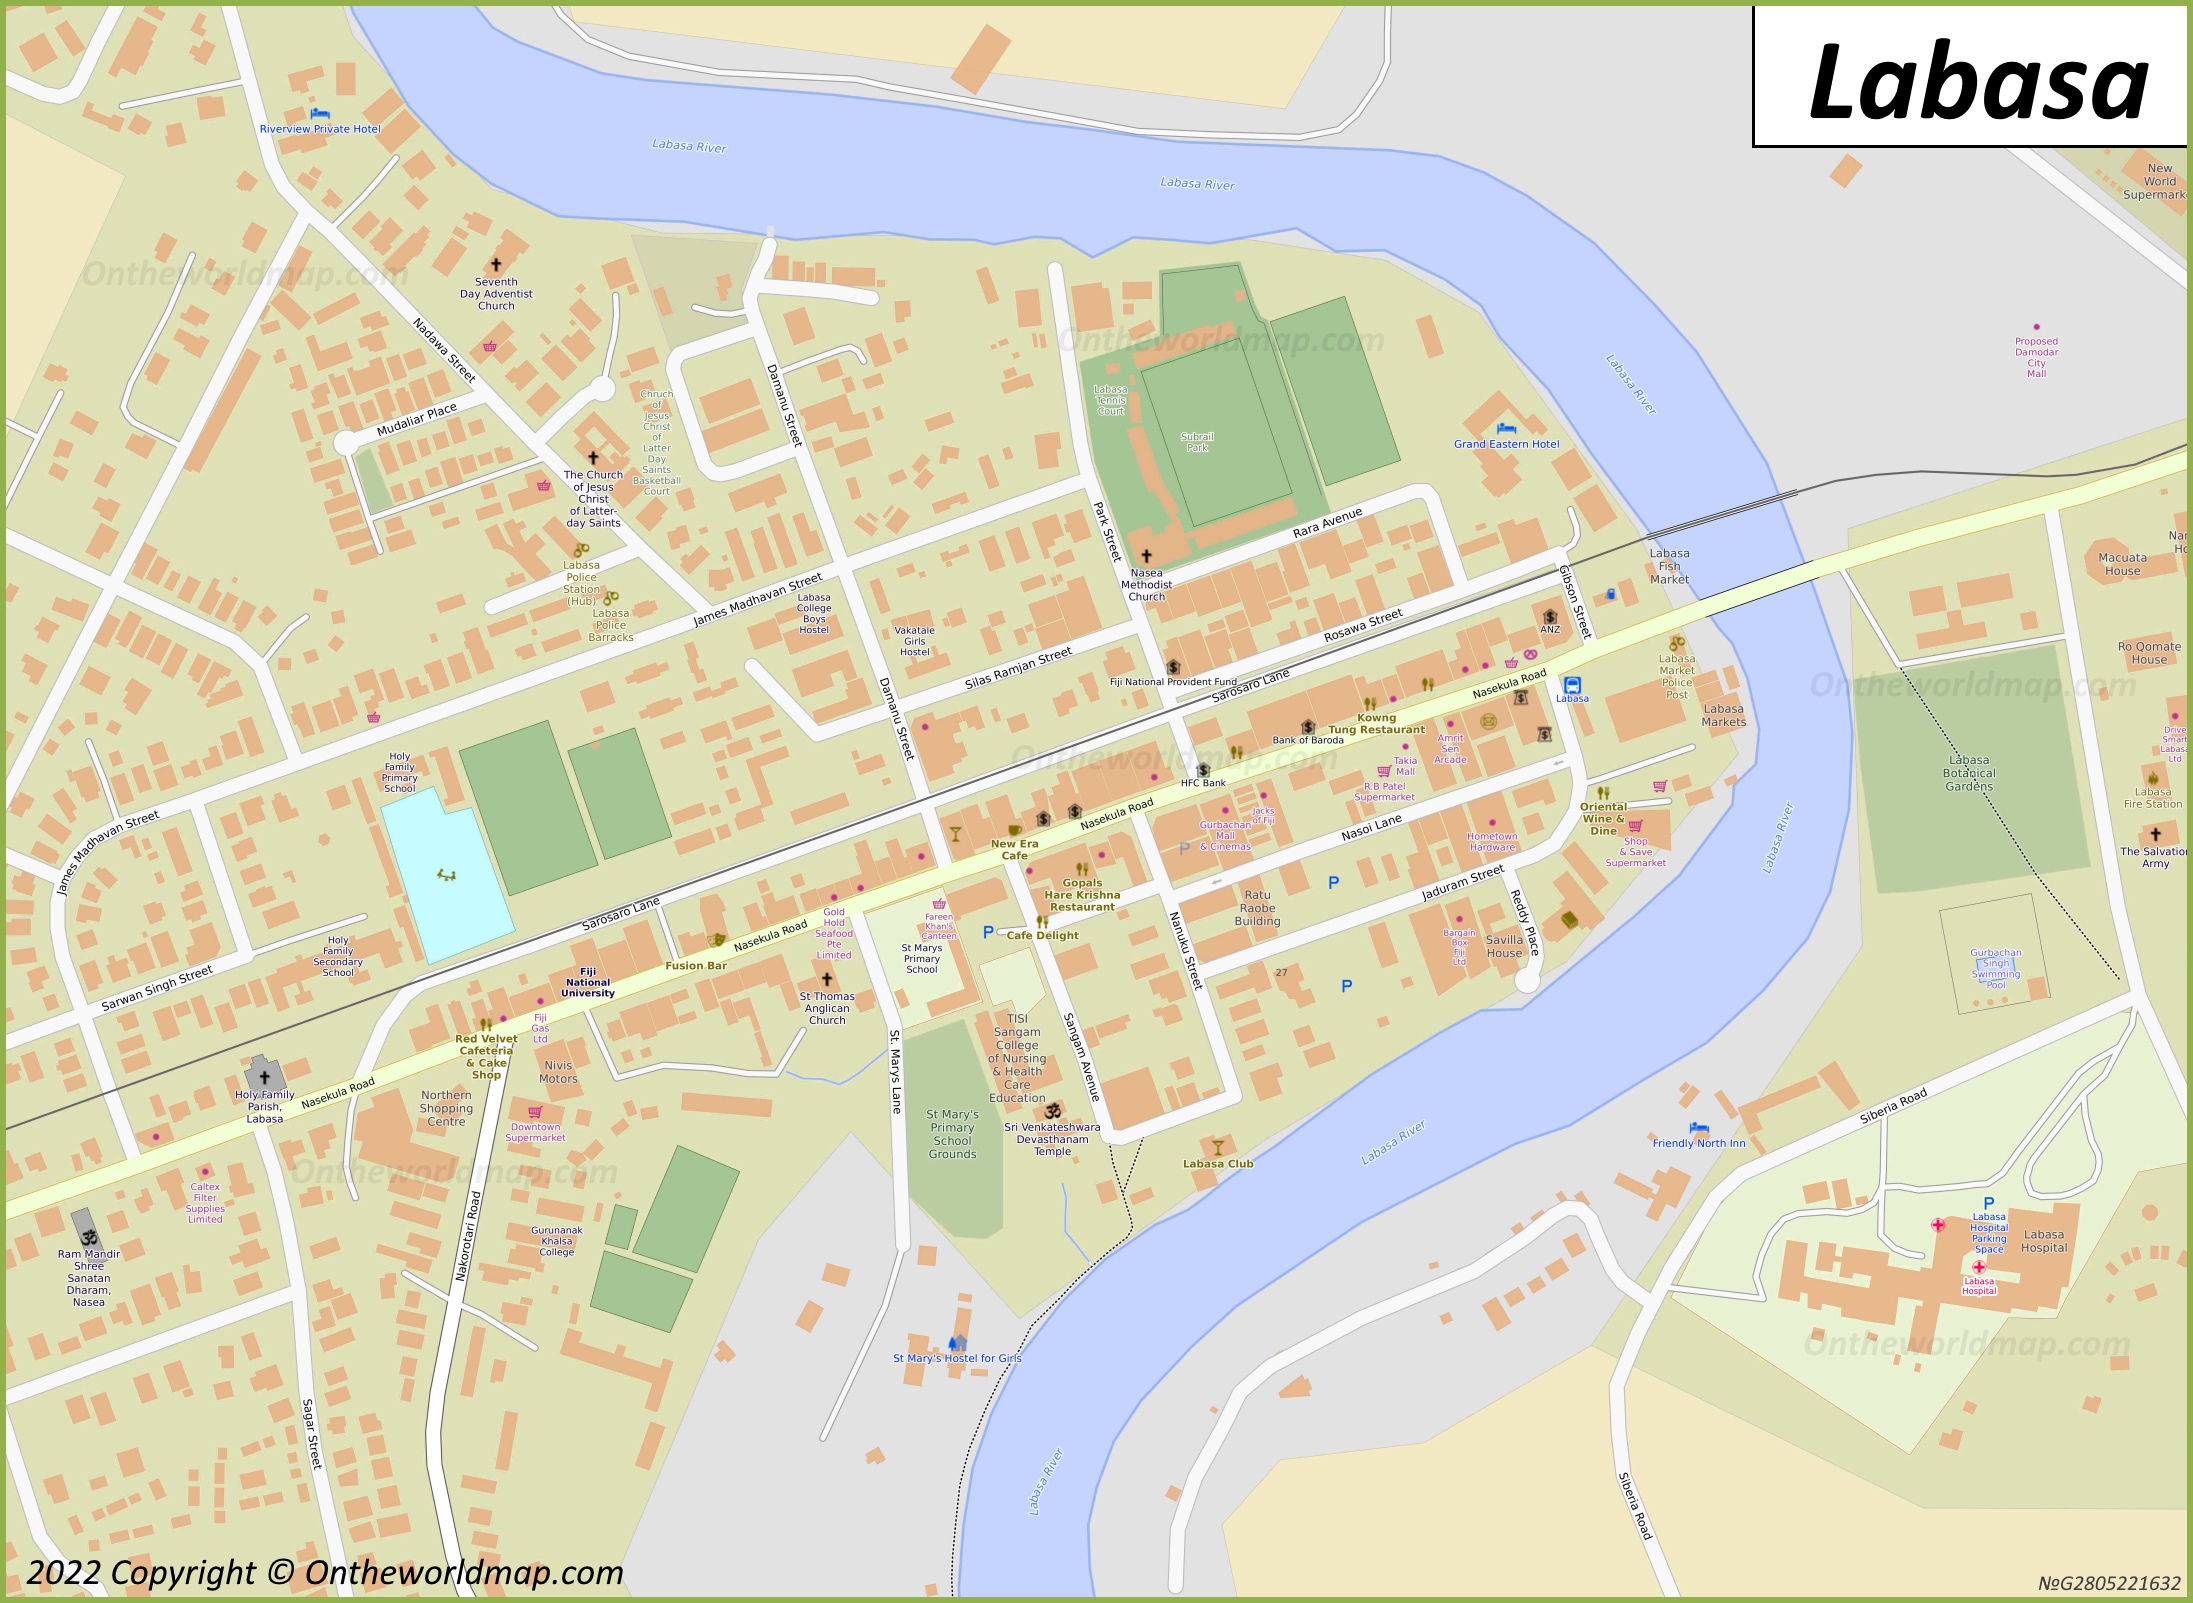 Labasa Town Centre Map